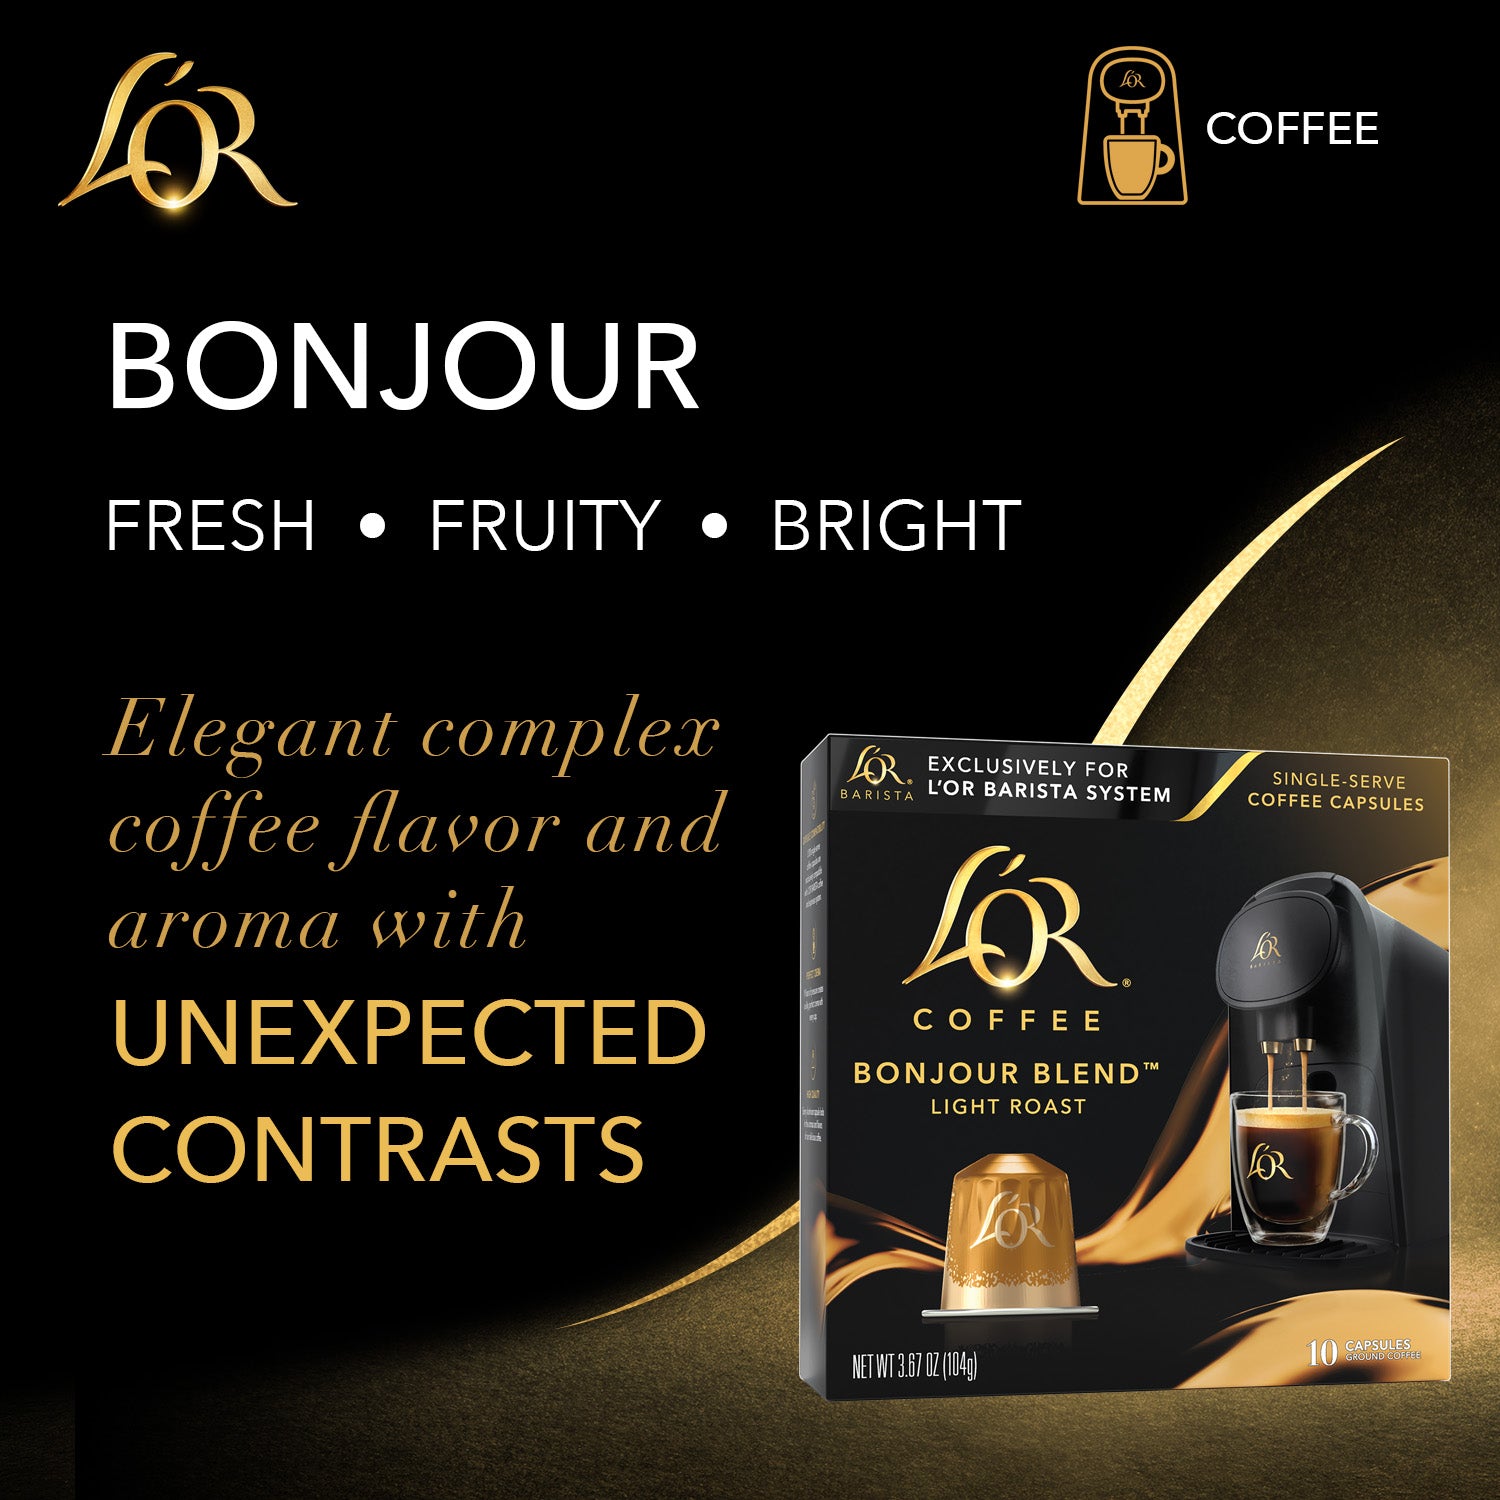 Bonjour is an elegant and complex coffee flavor.